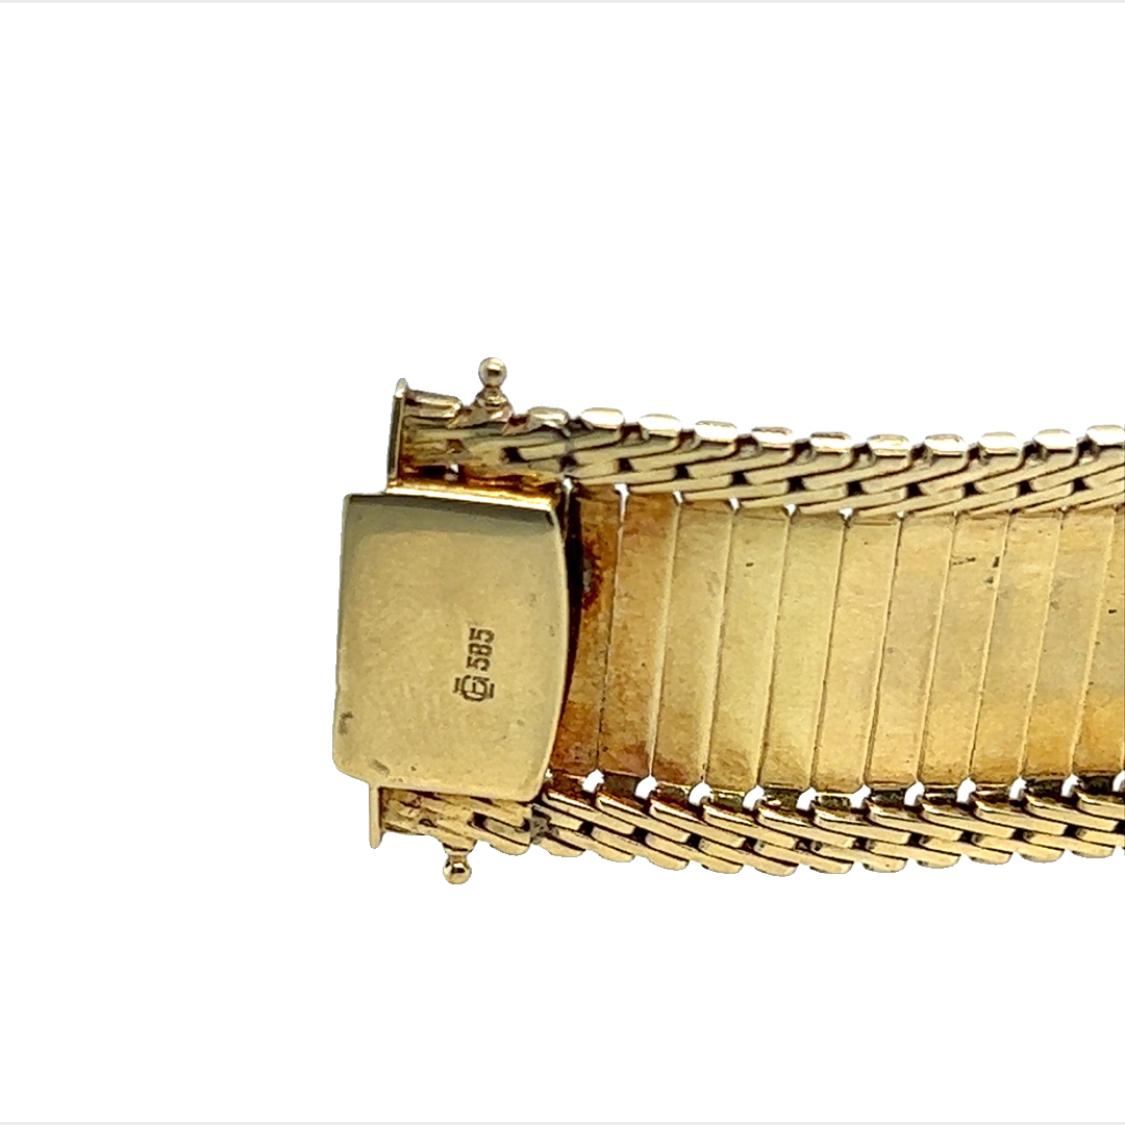 French Textured 14k Yellow Gold Retro Style Bracelet, Flexible Hinged Design In Excellent Condition For Sale In Beverly Hills, CA